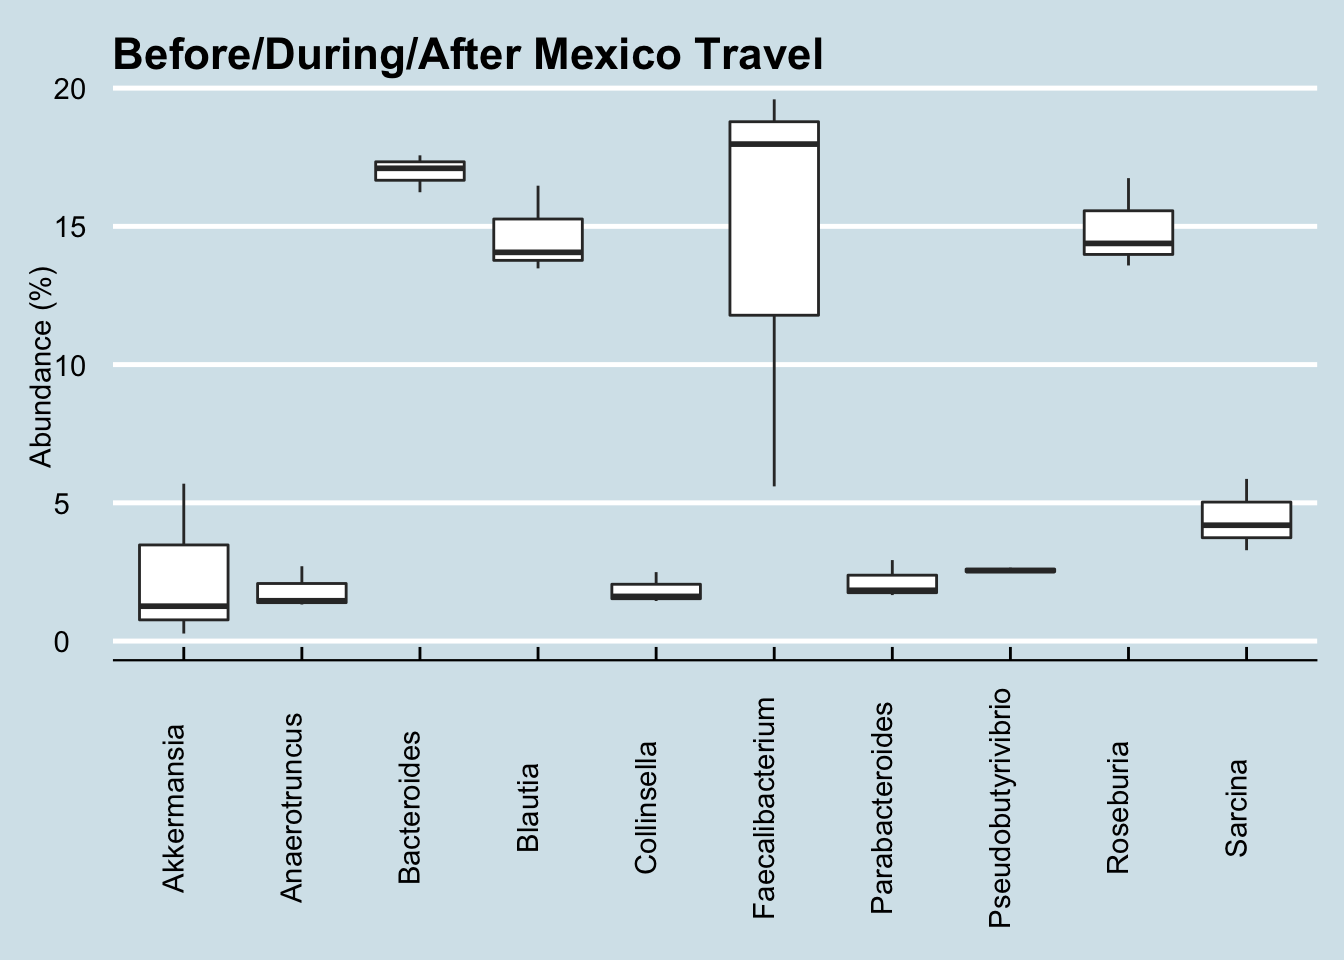 Variability of key genus abundance before/during/after a trip to Mexico.